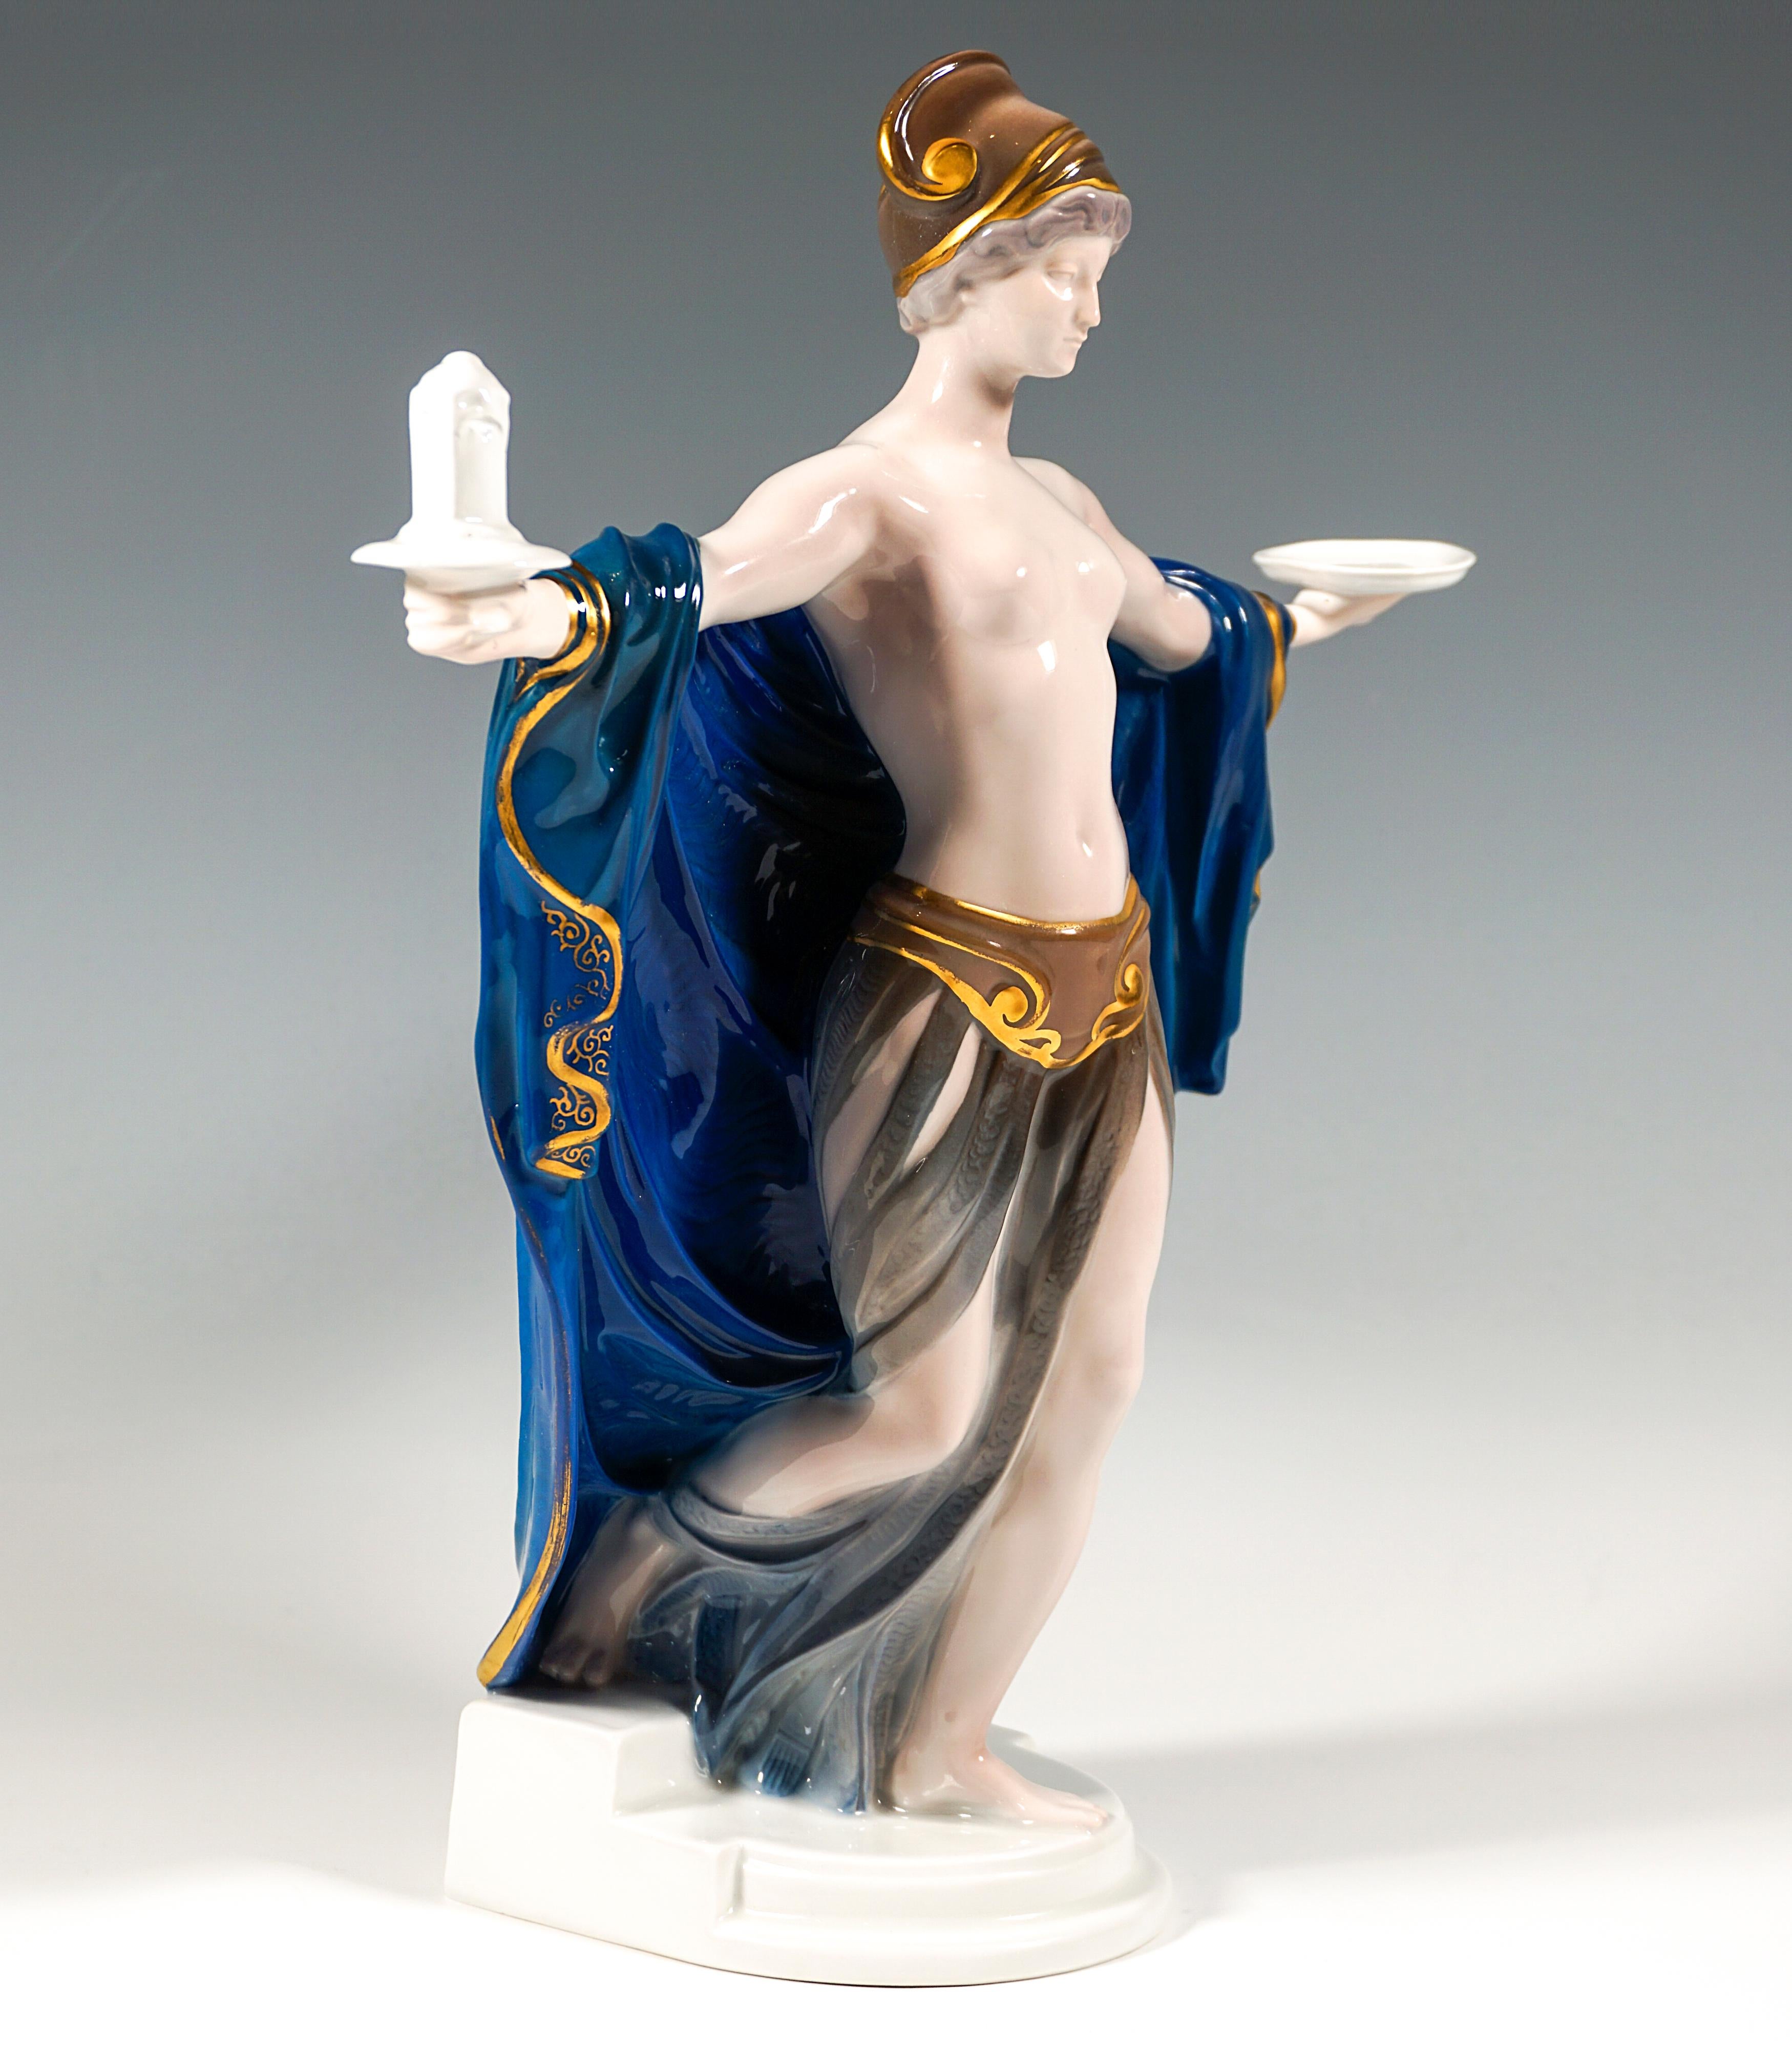 Very rare Rosenthal figurine, only 200 versions in existence:
A scantily clad Art Nouveau beauty, a belt around her hips with a long, softly falling shawl draping around her legs, a helmet-like headdress with details reminiscent of Greek antiquity